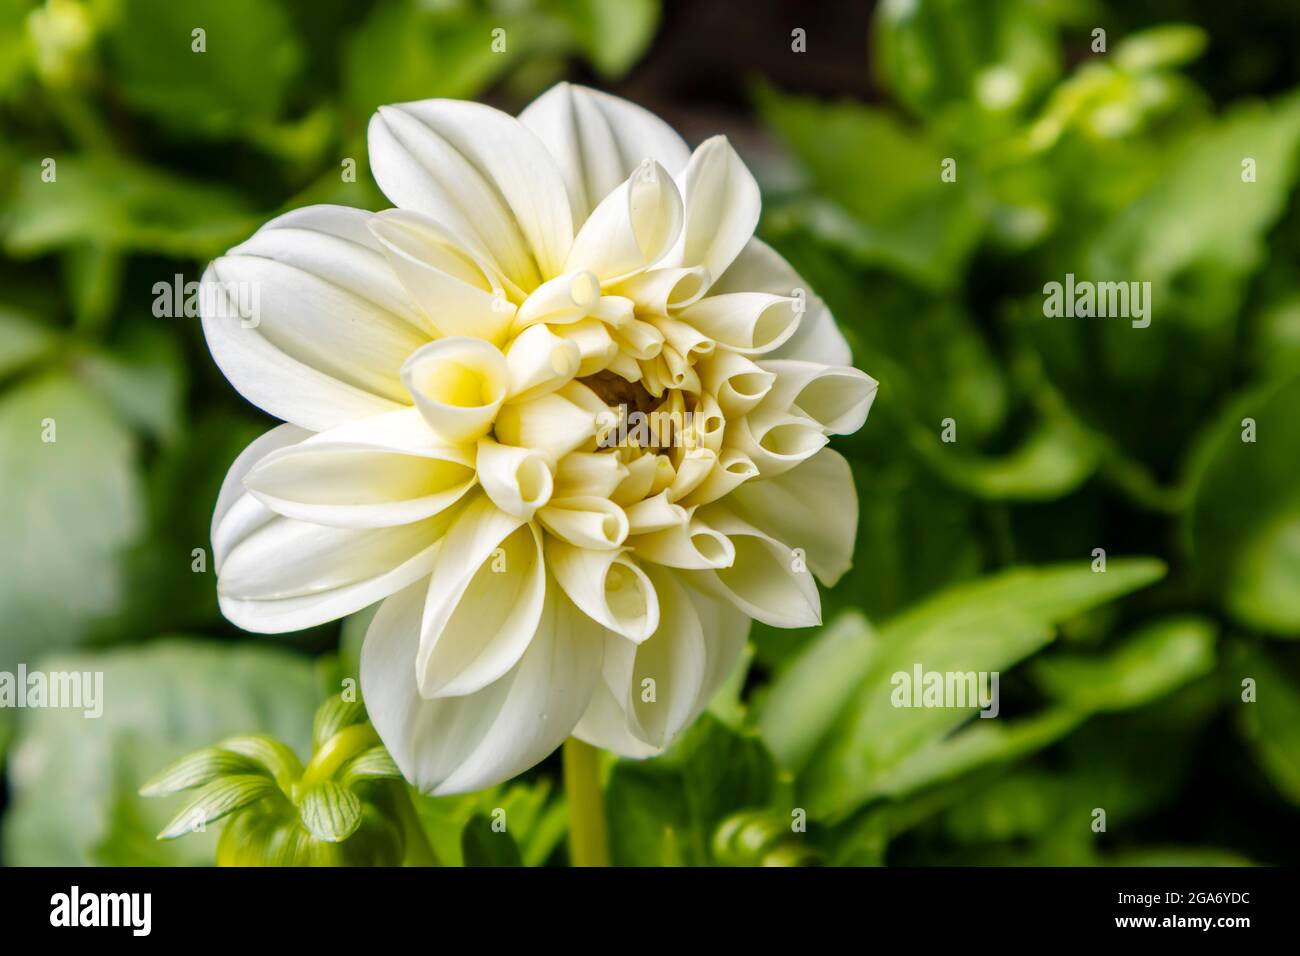 Very pale yellow small flower head of Dahlia plant. Stock Photo